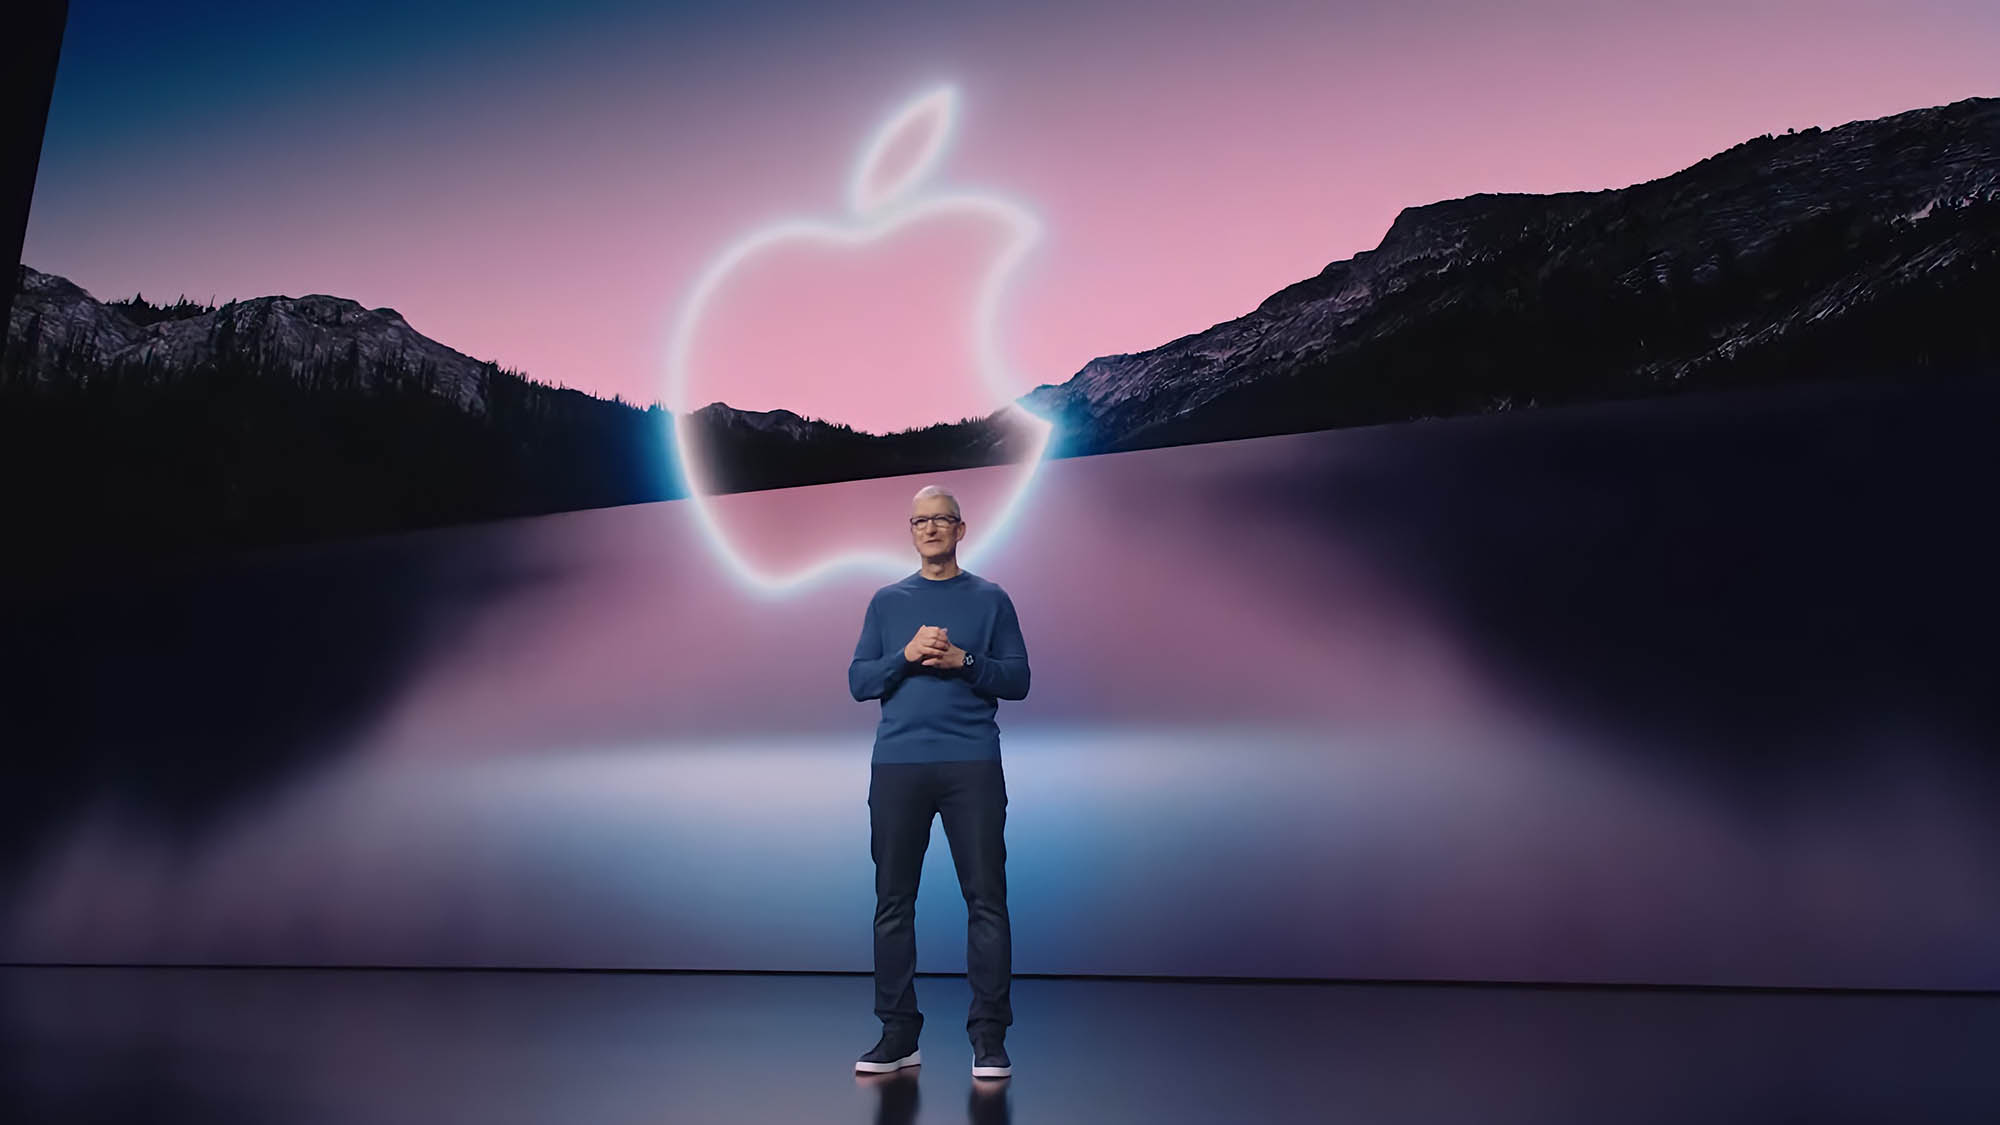 Apple October event 2022: New Macs, iPads, and more